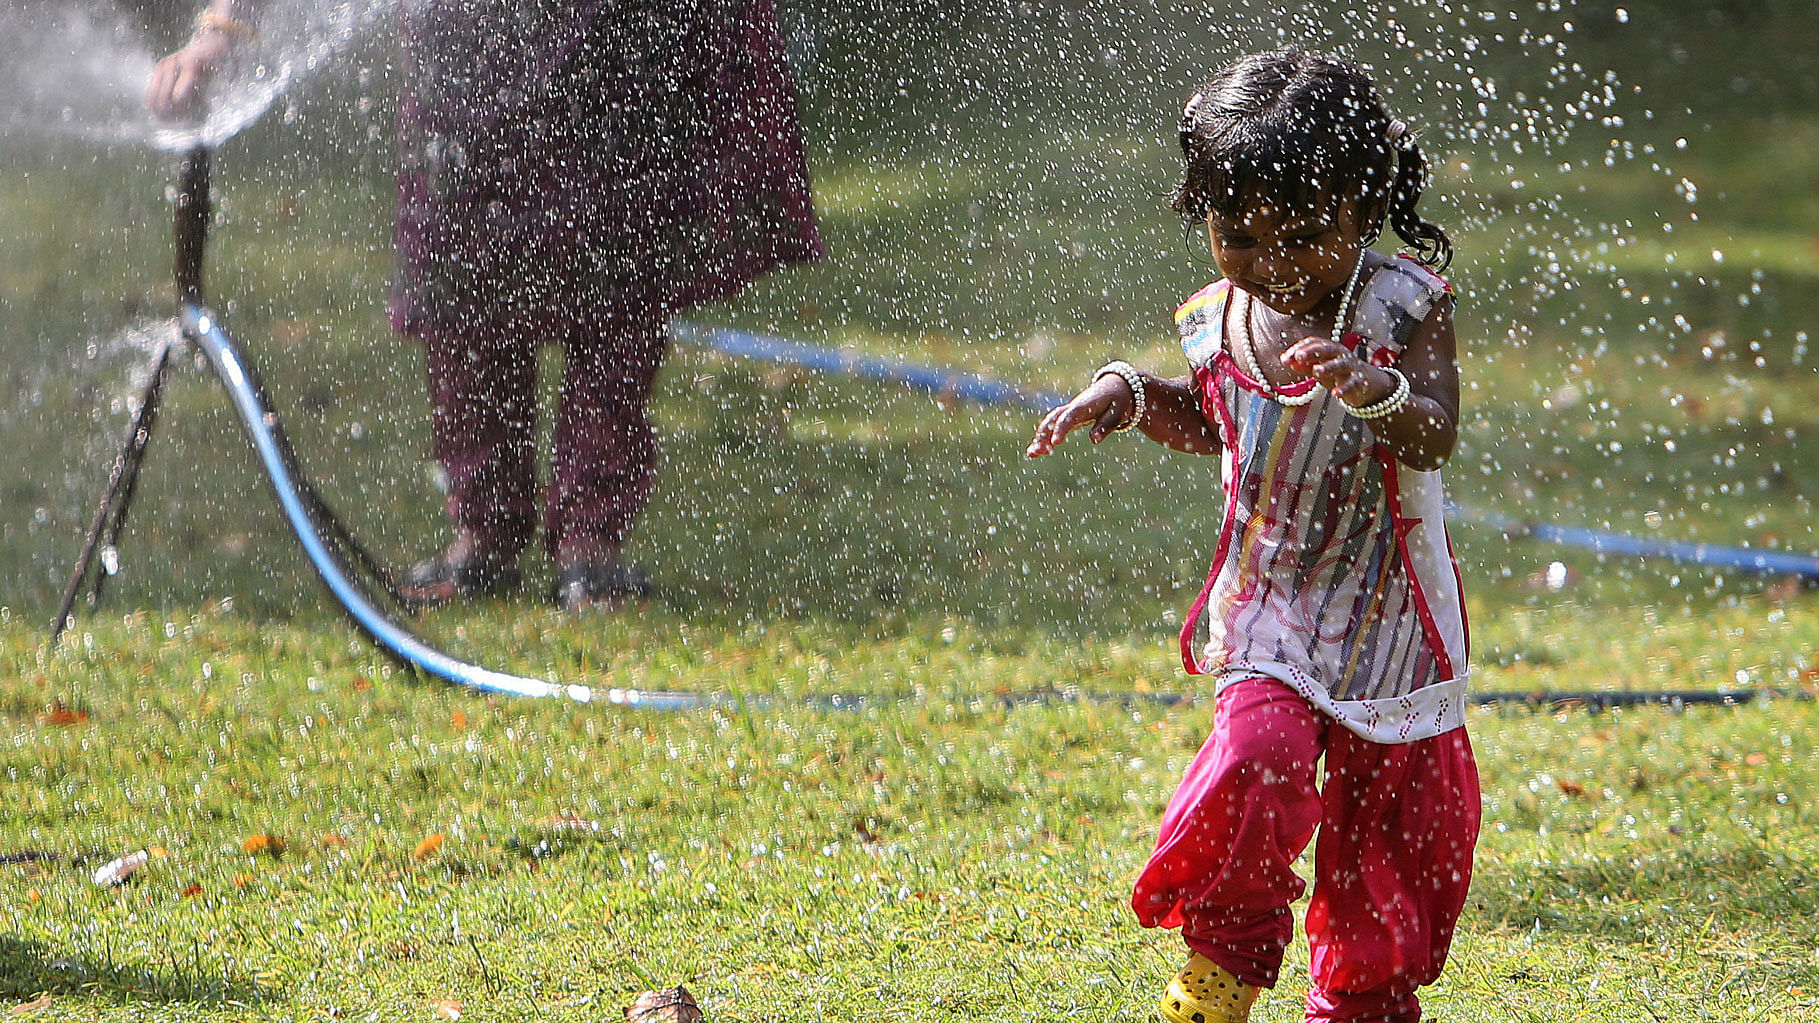 A child plays in front of a water sprinkler to cool off on a hot summer day. (Photo: AP)